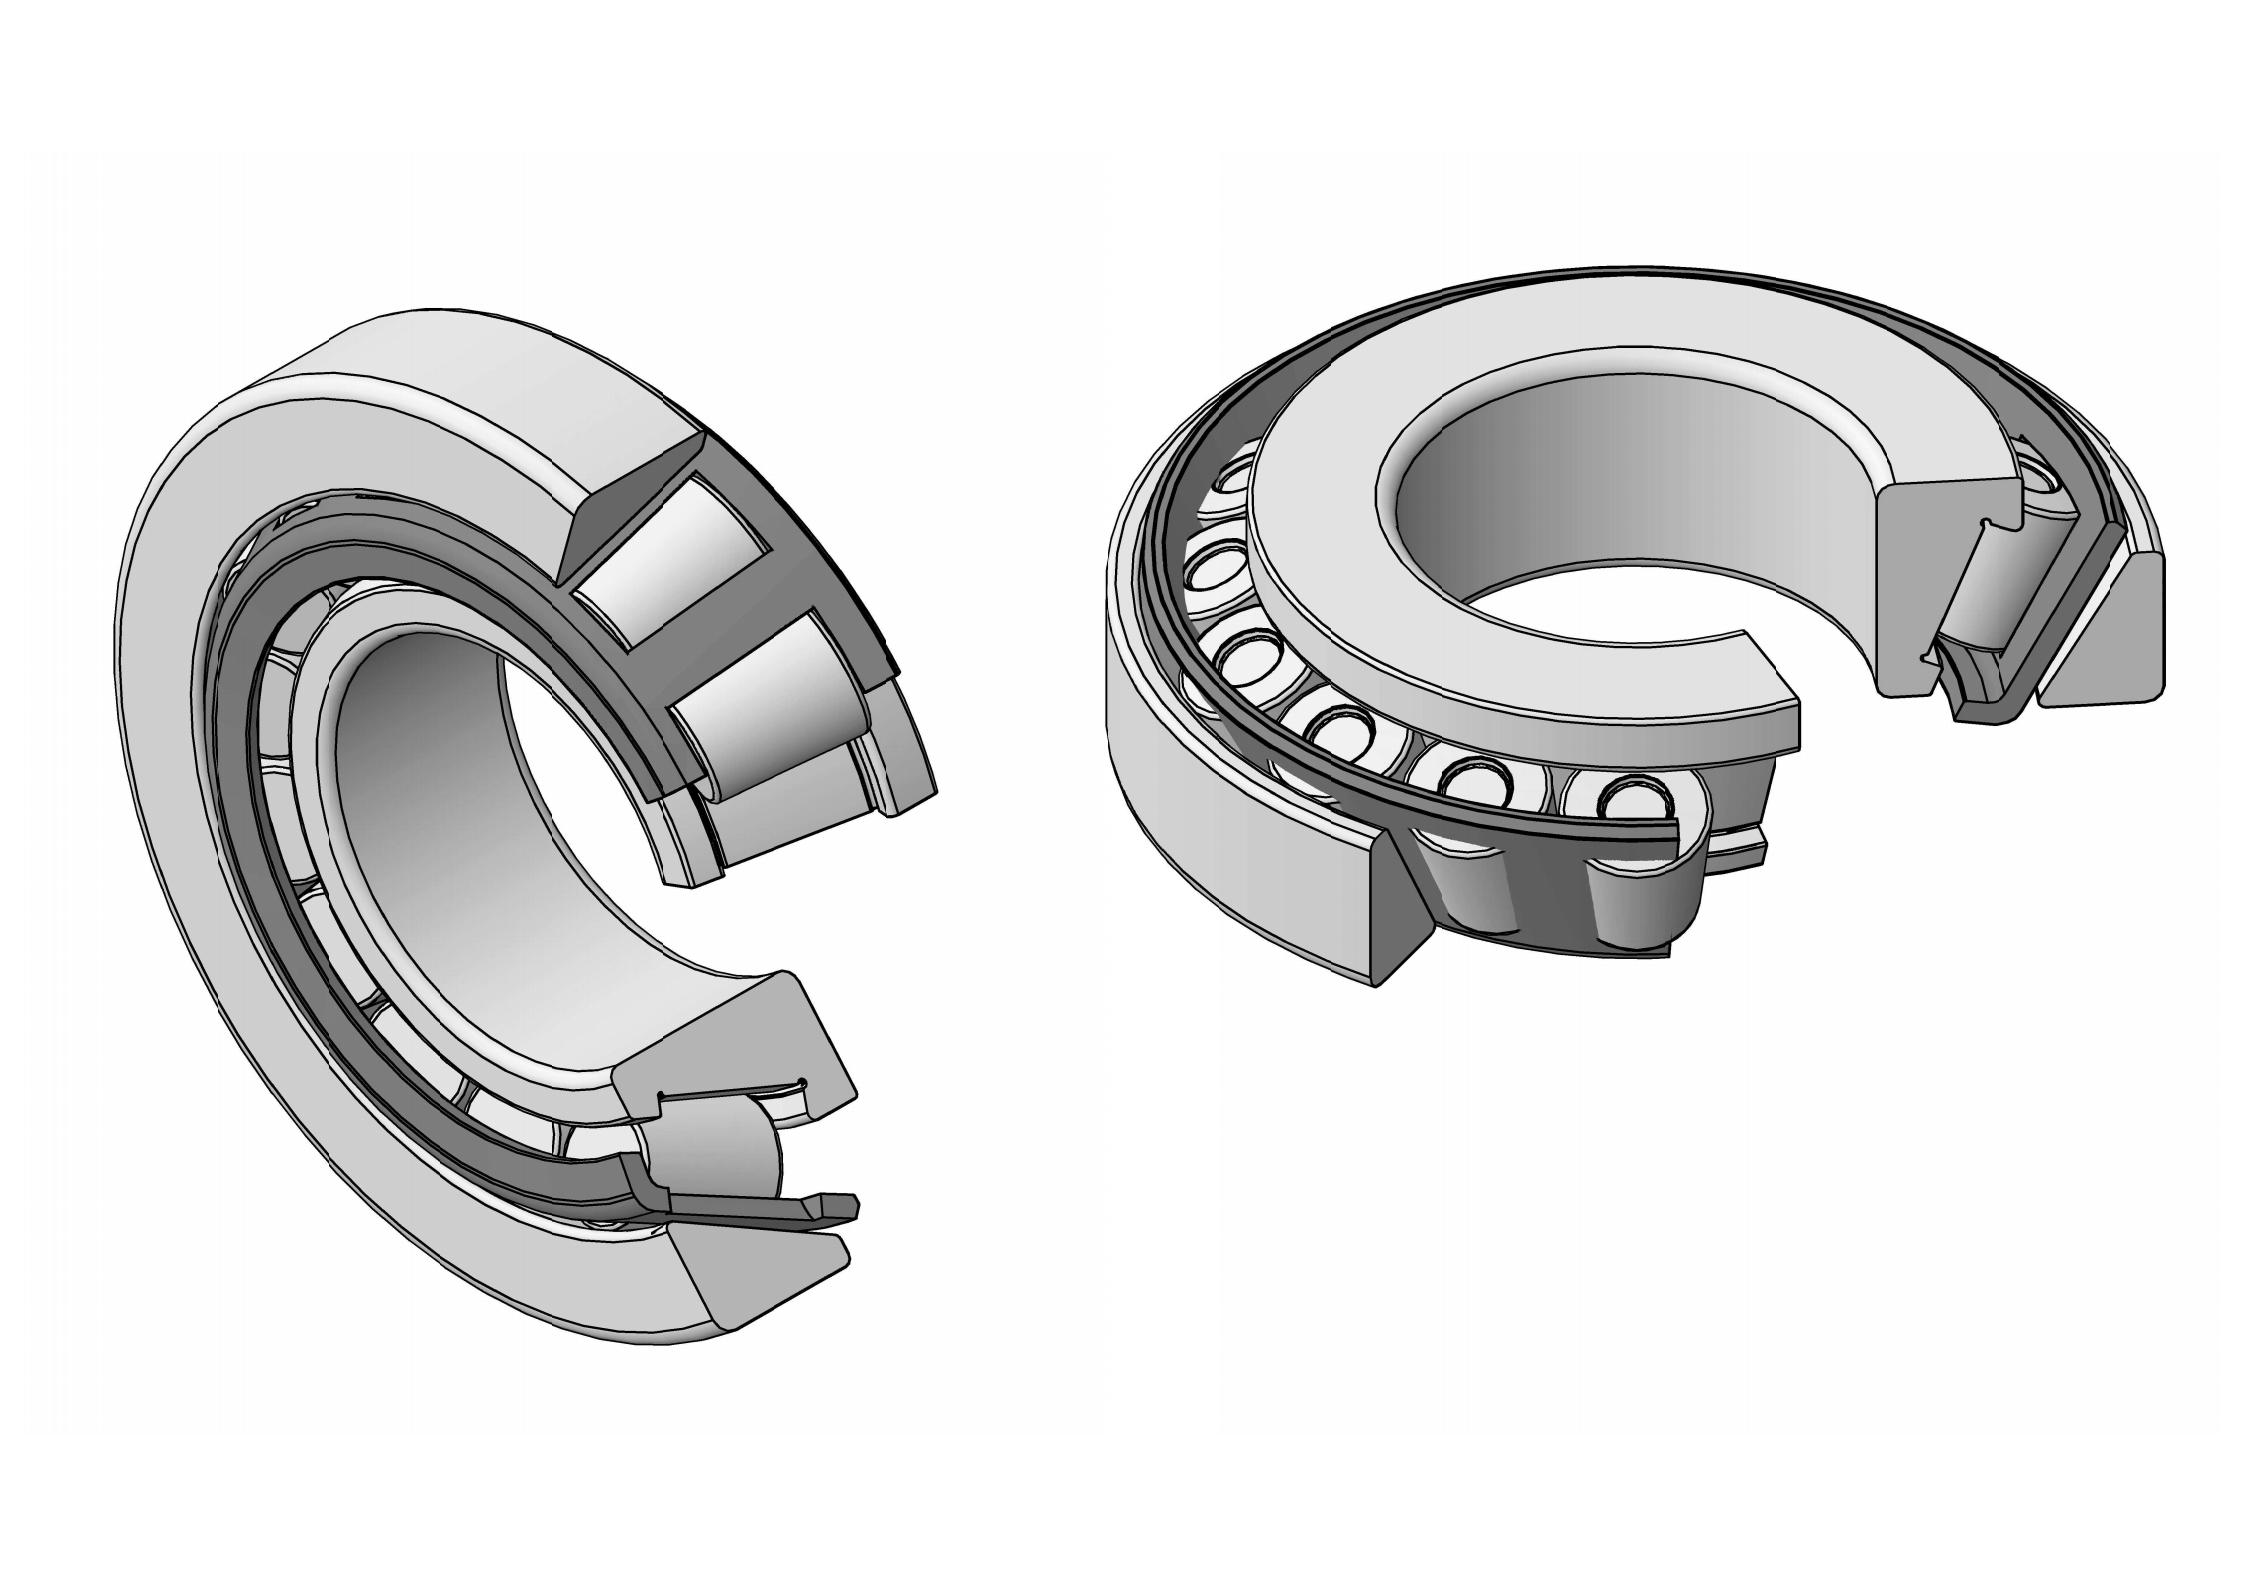 399A / 394A inch series Tapered cov menyuam bearings